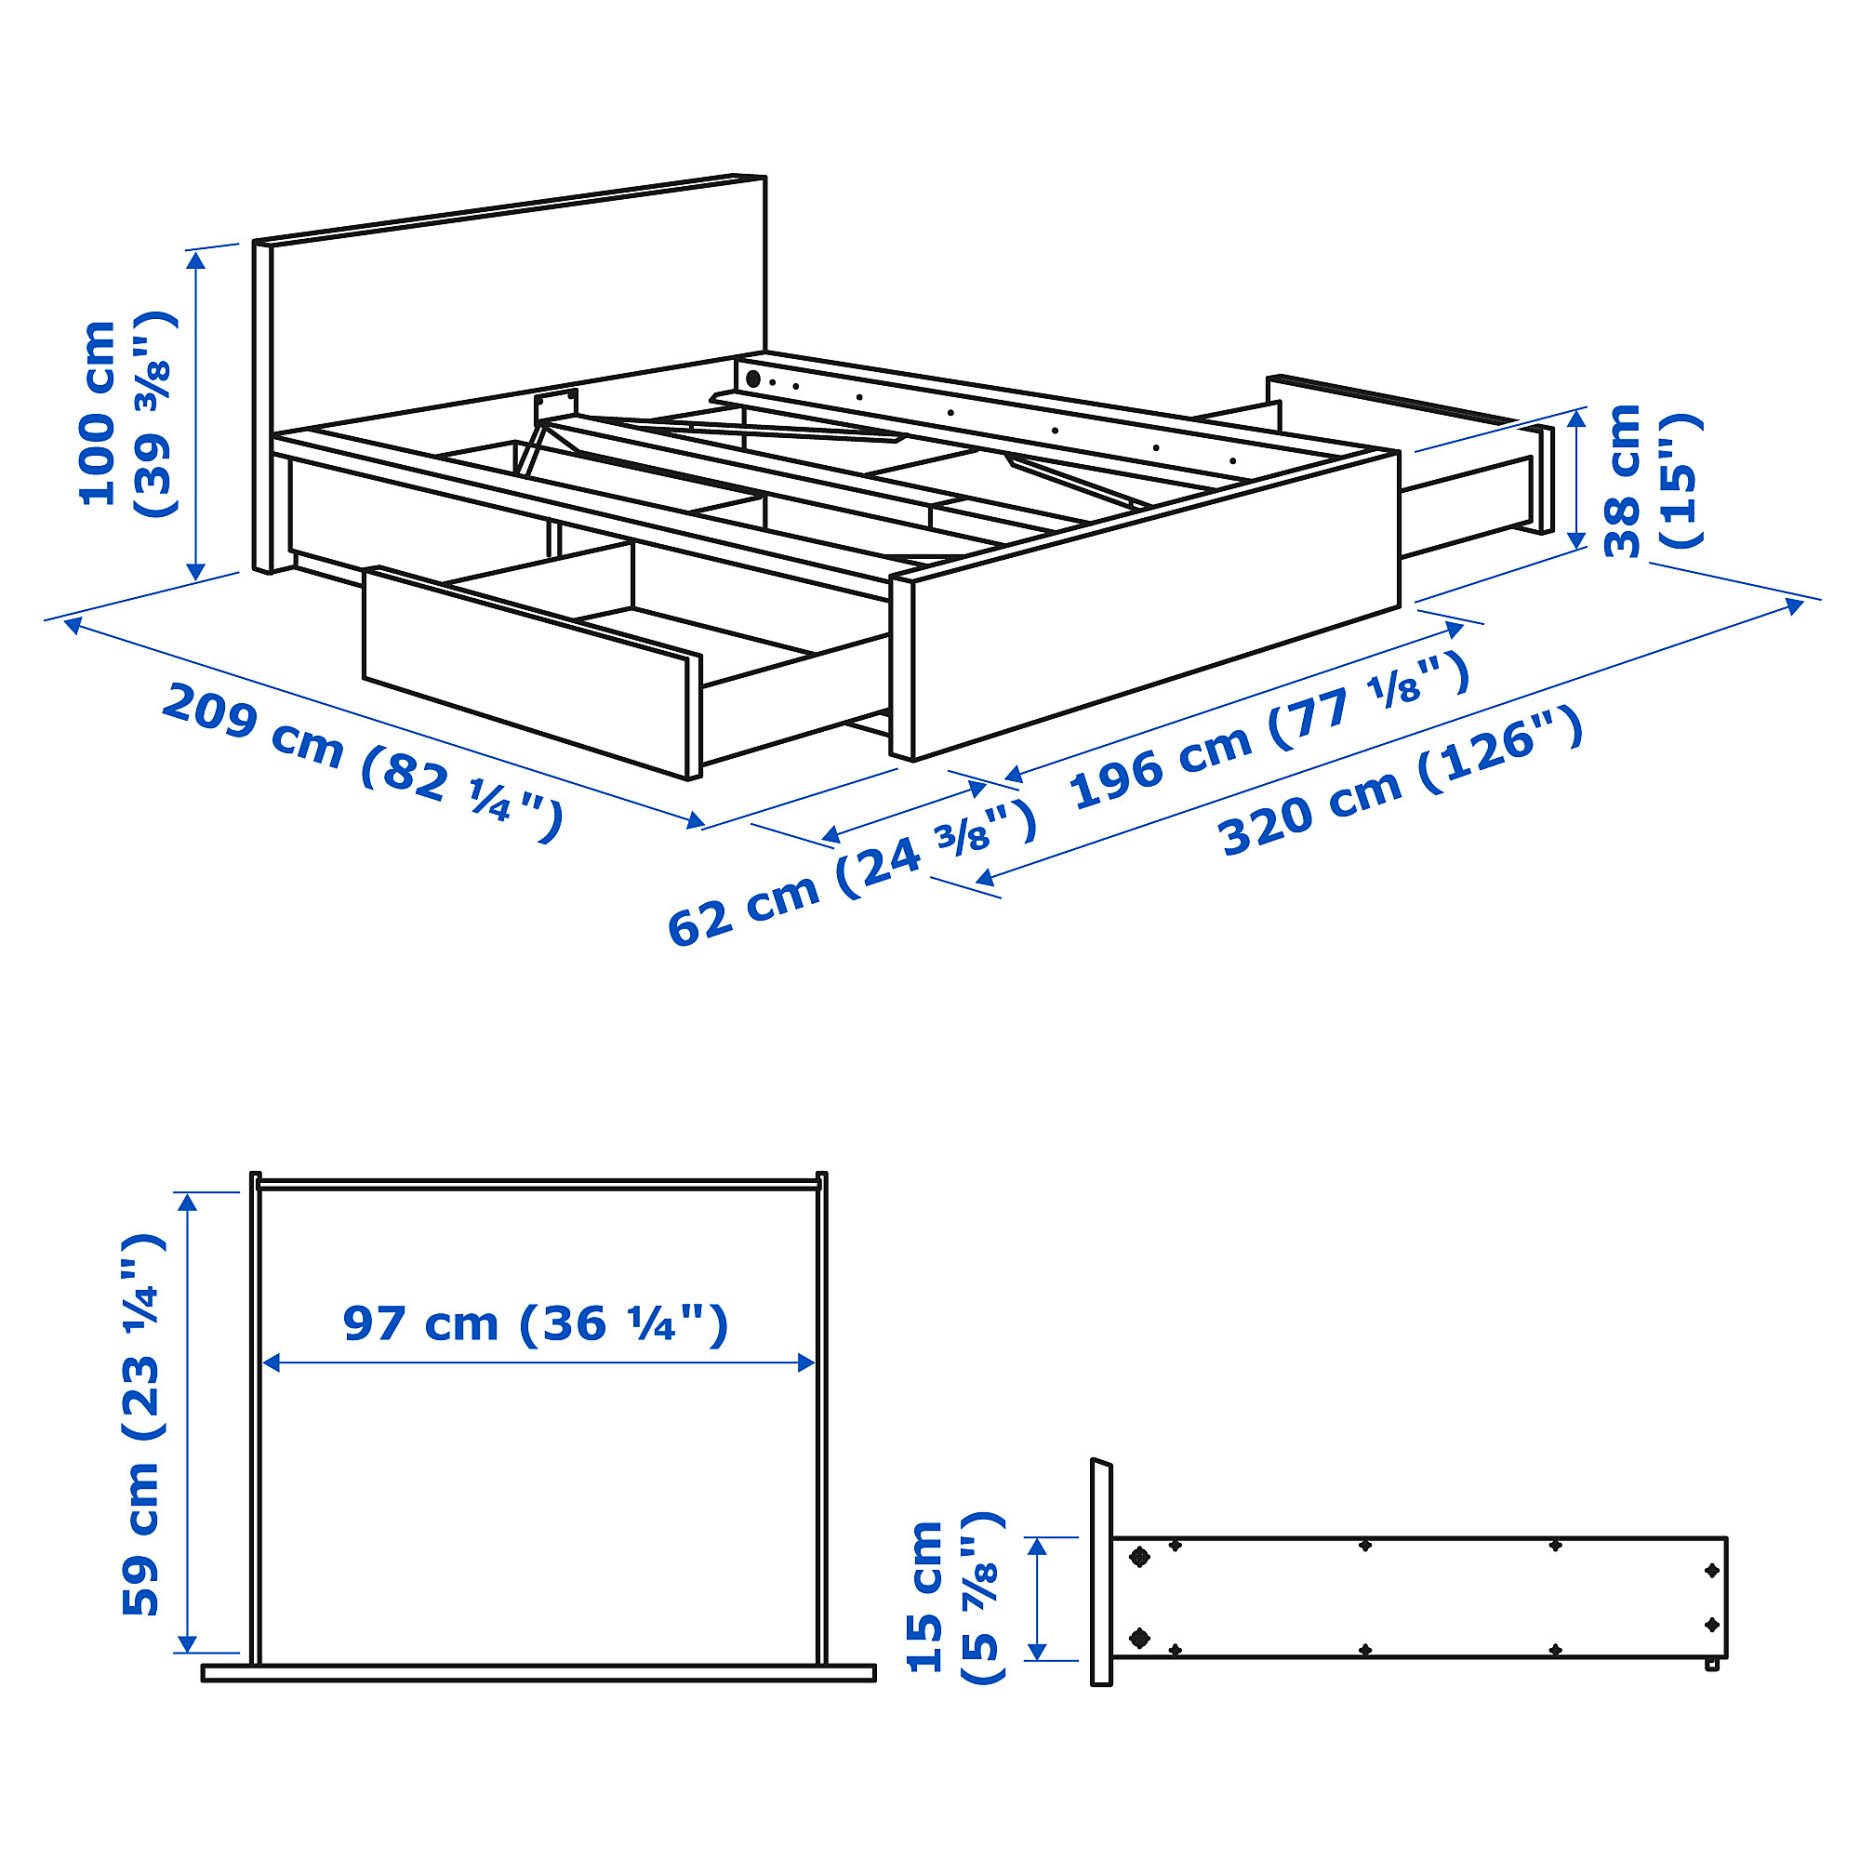 MALM, bed frame/high with 4 storage boxes, 180X200 cm, 994.950.16